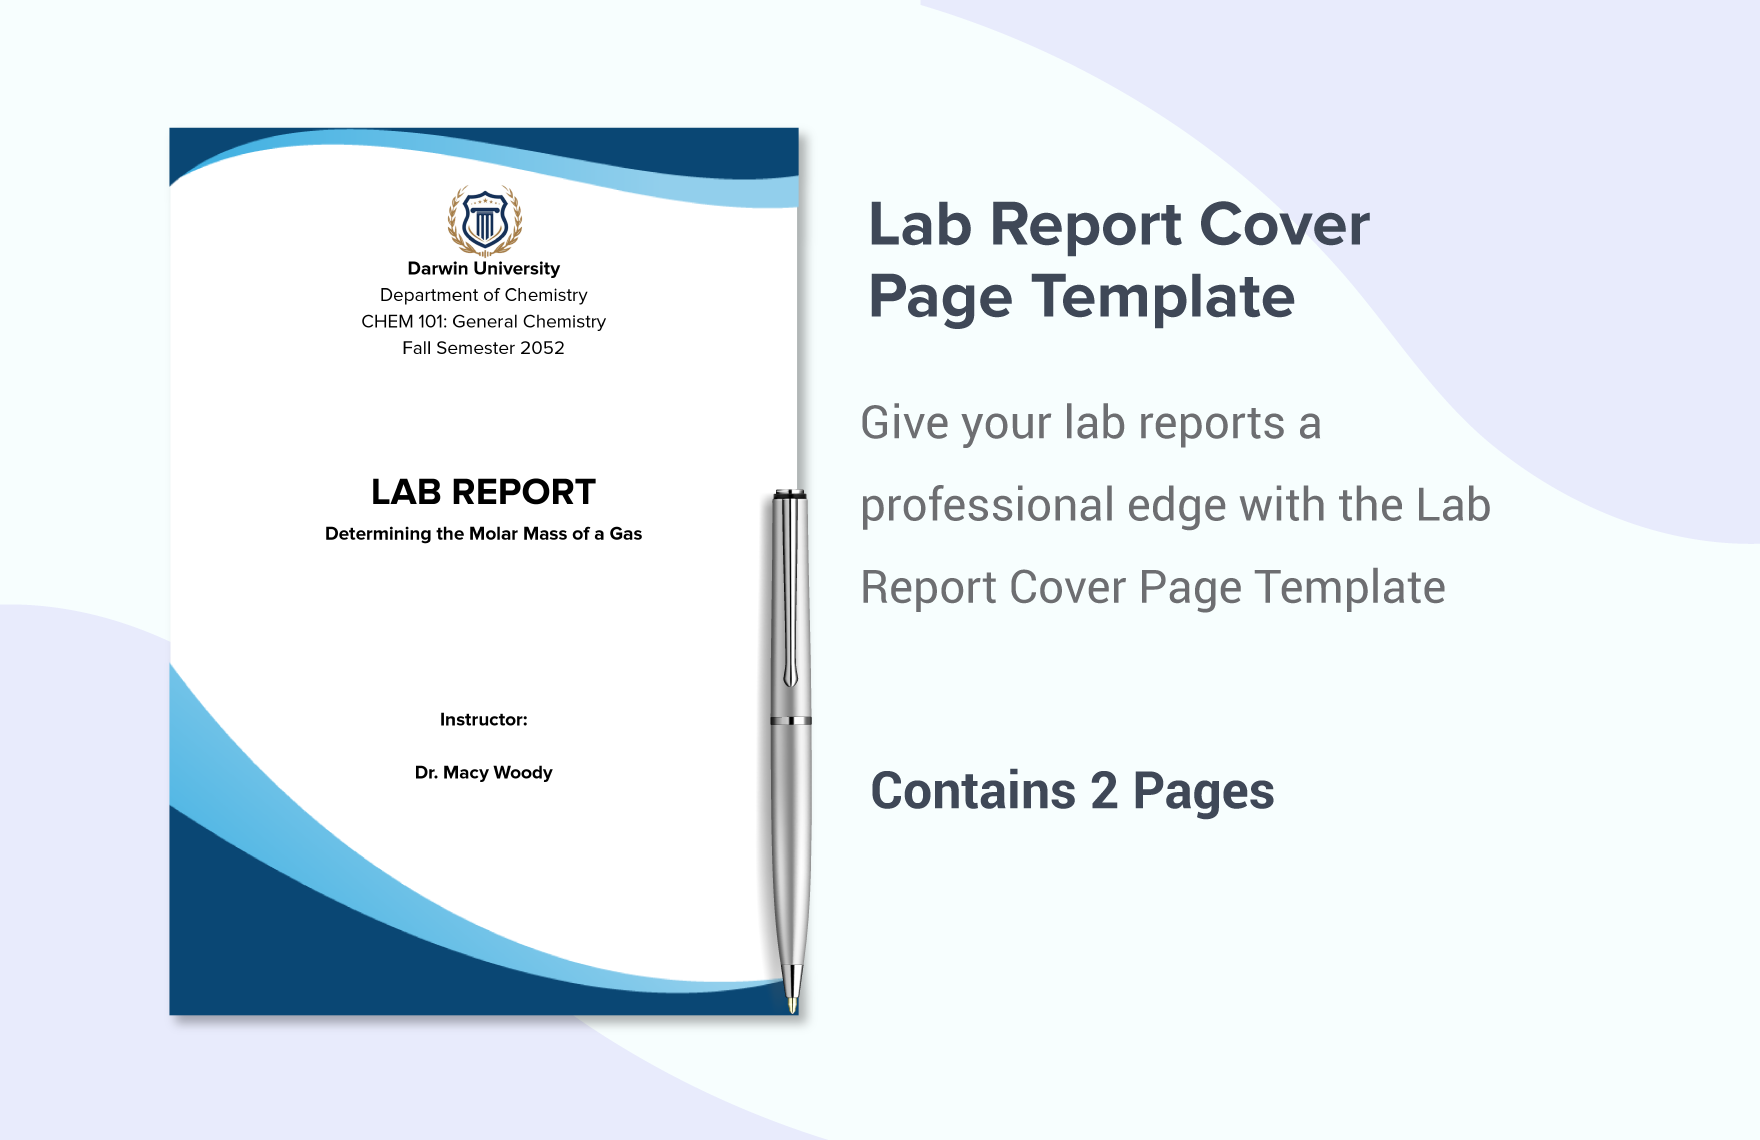 Lab Report Cover Page Template